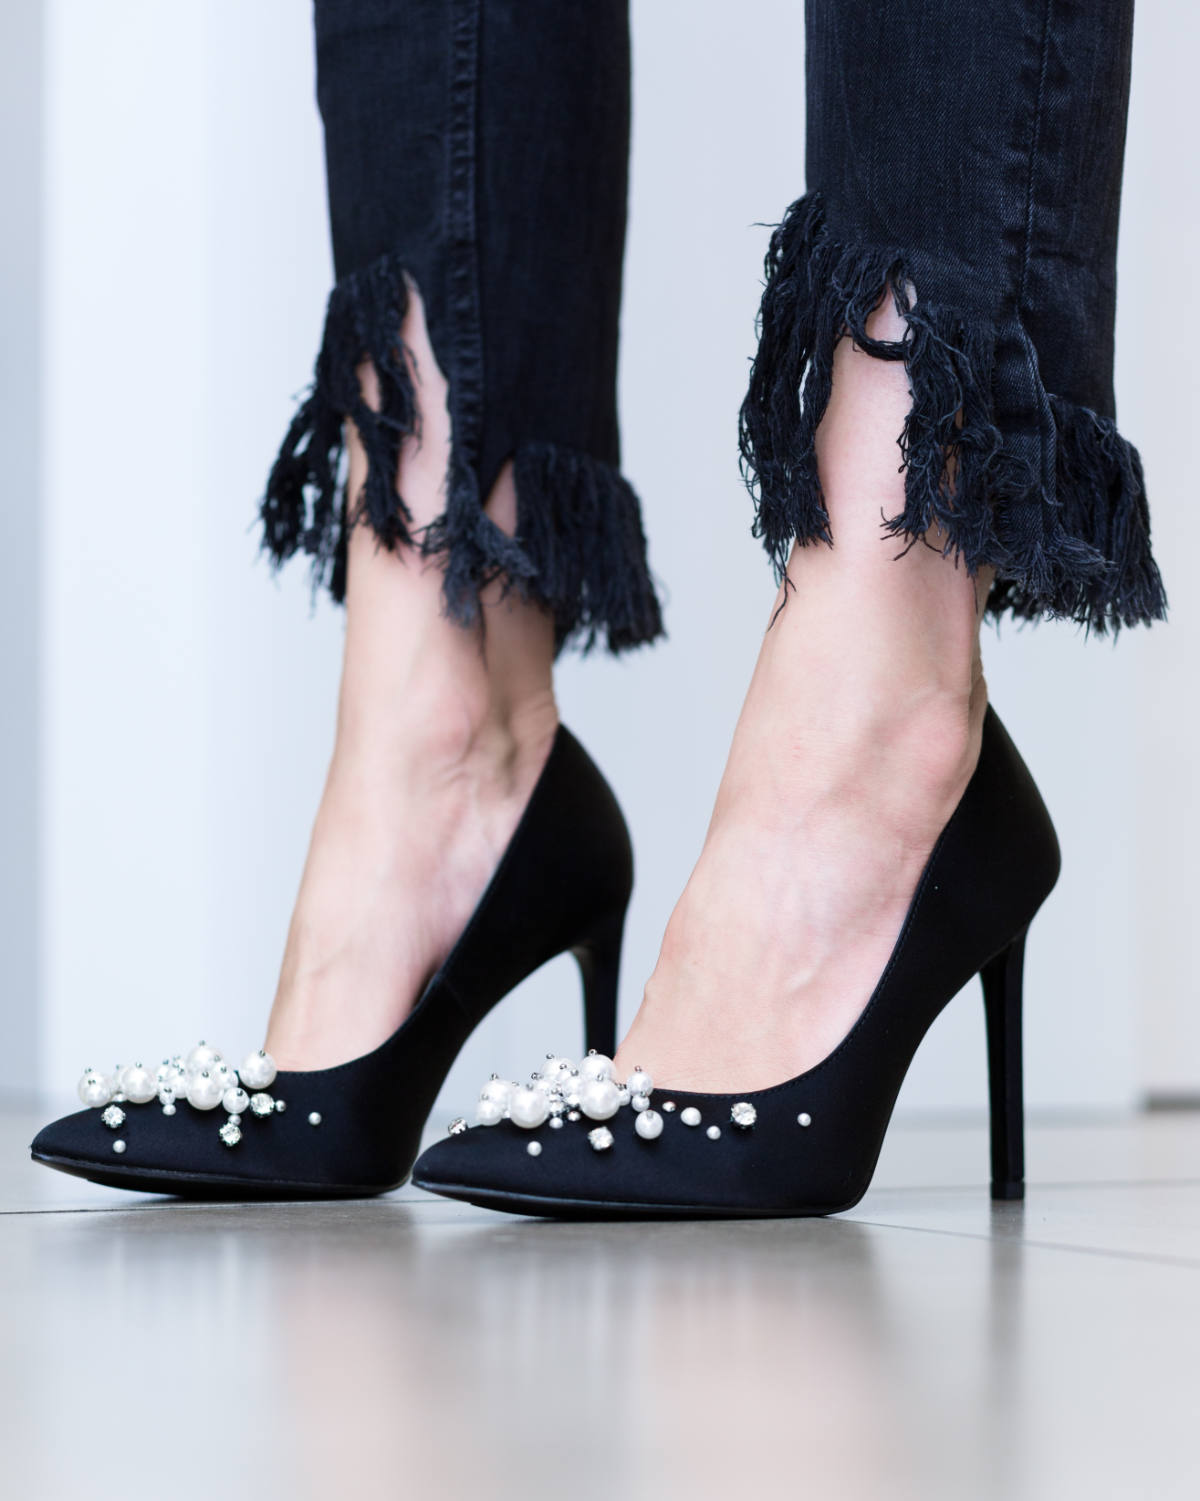 Science proves high heels do have power over men